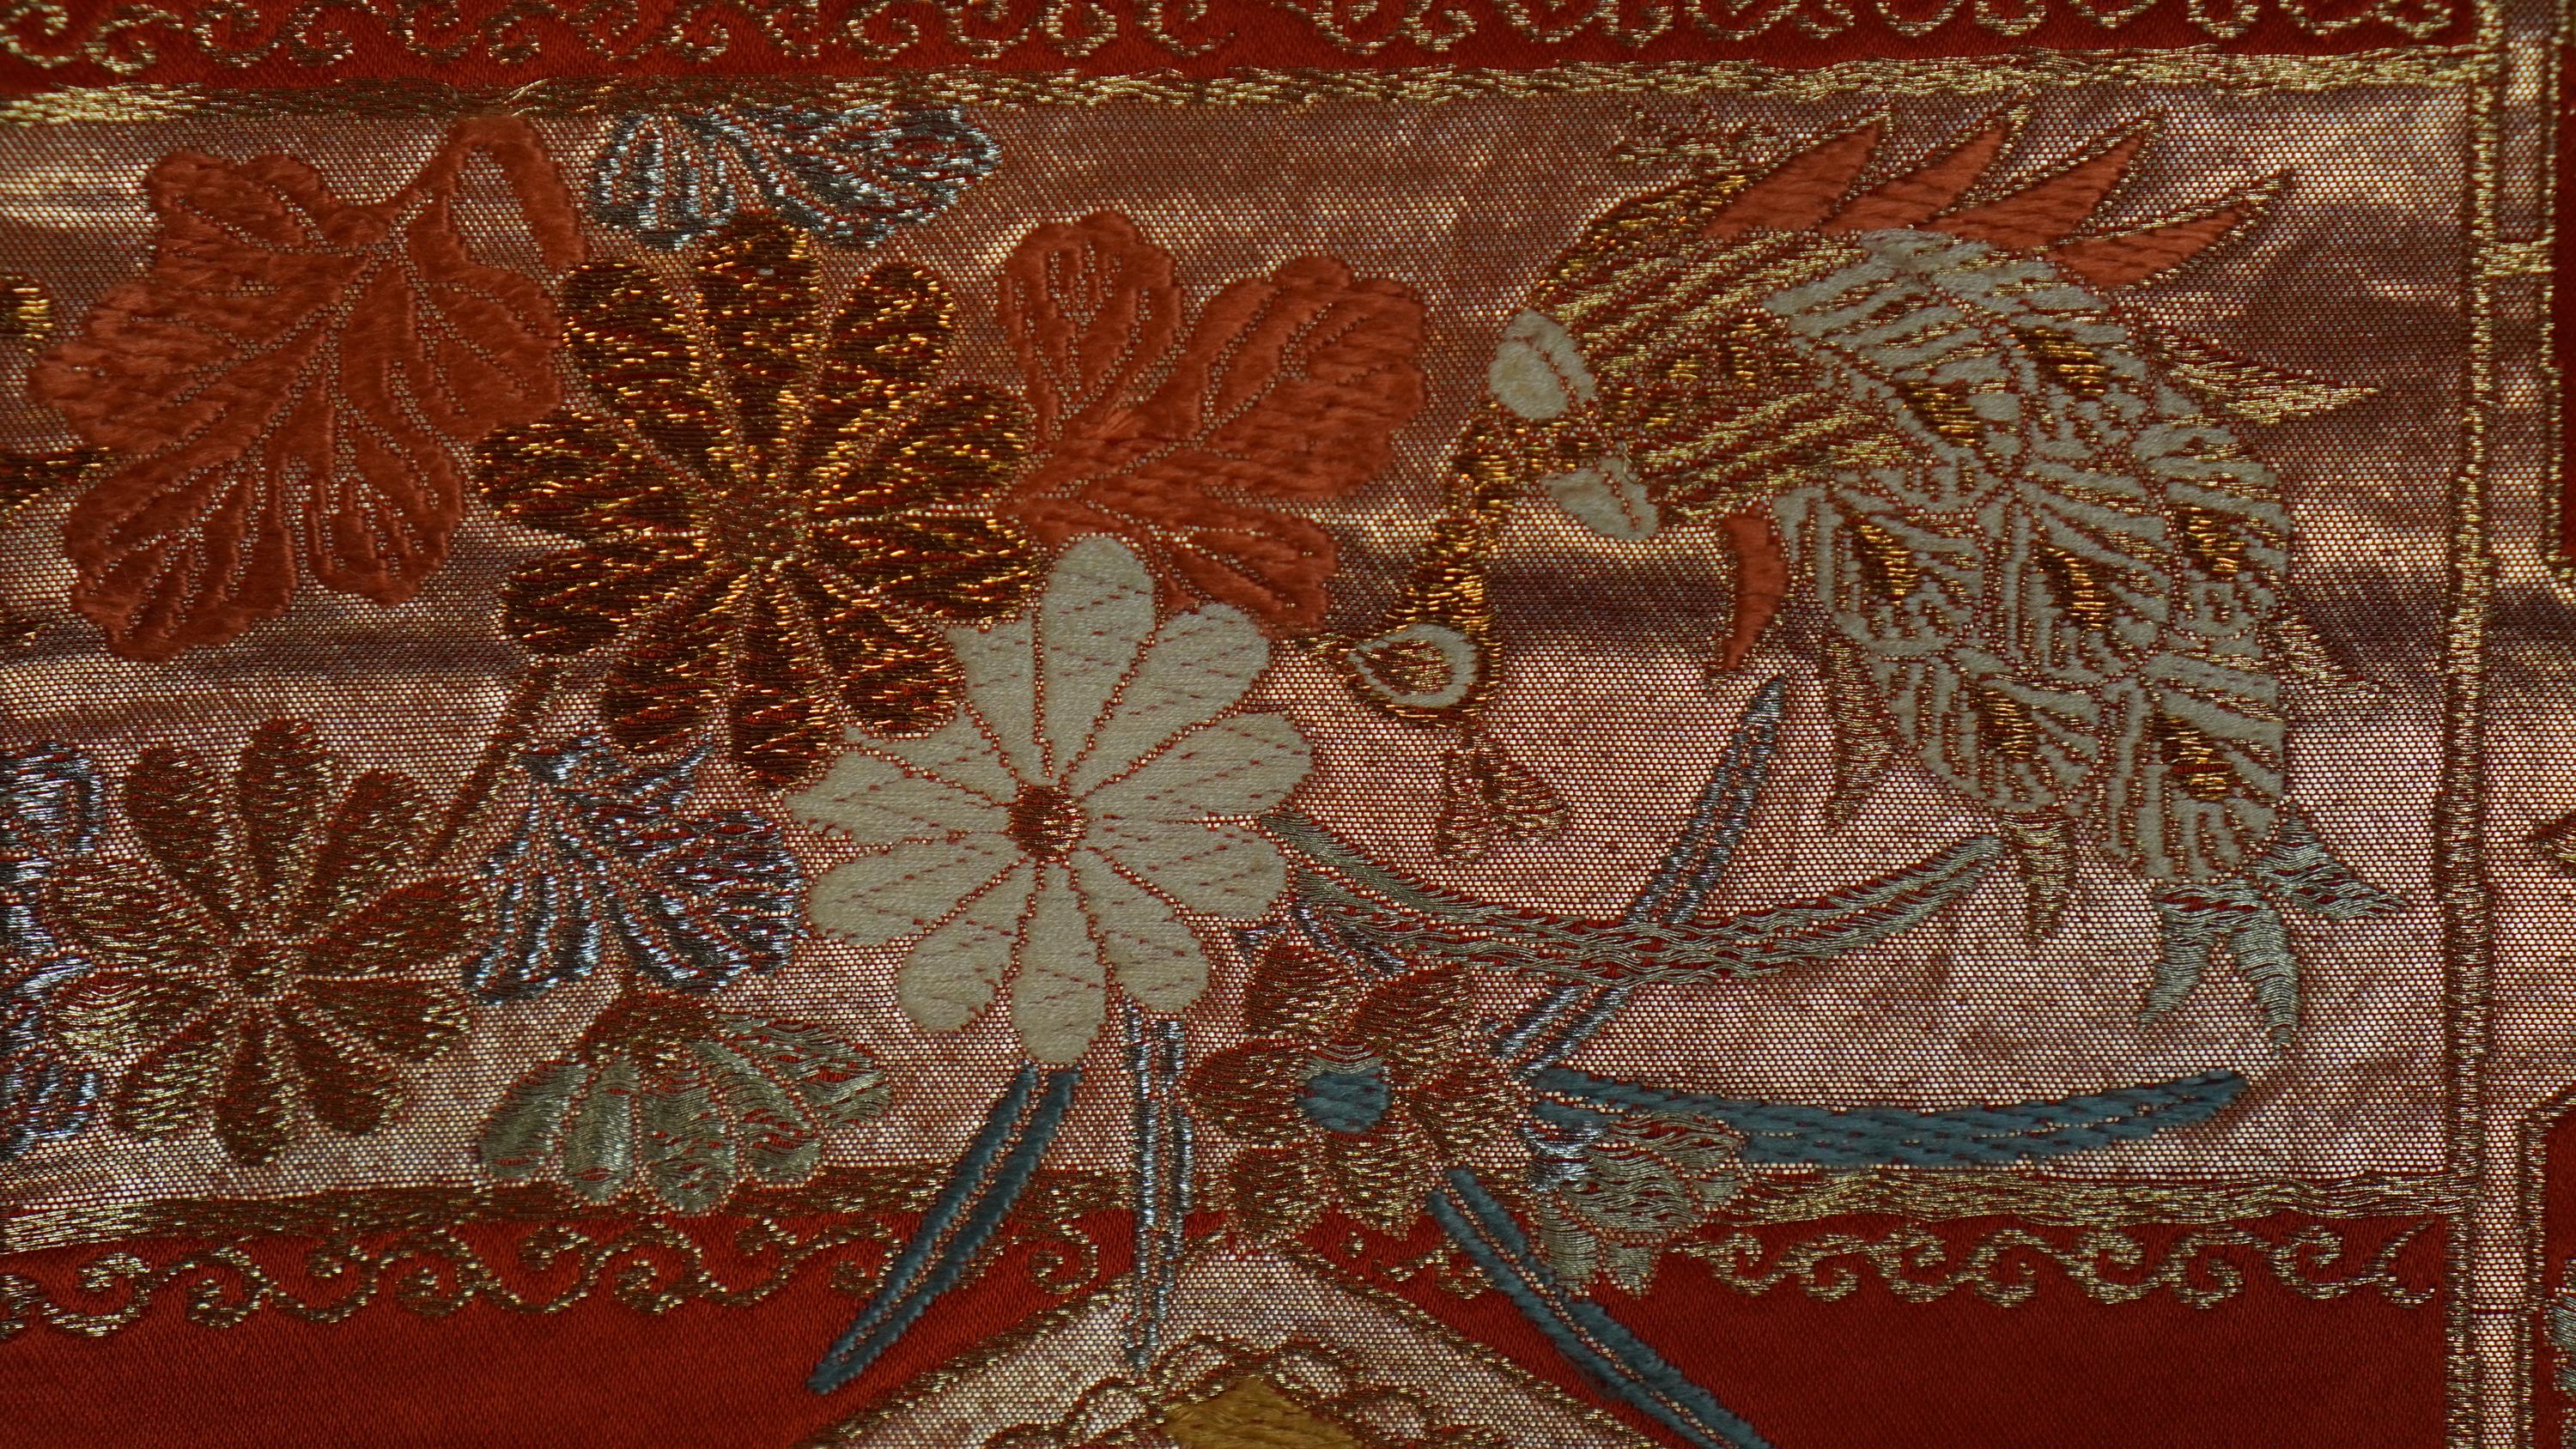 Hand-Crafted Japanese Kimono Art / Tapestry, Longevity For Sale